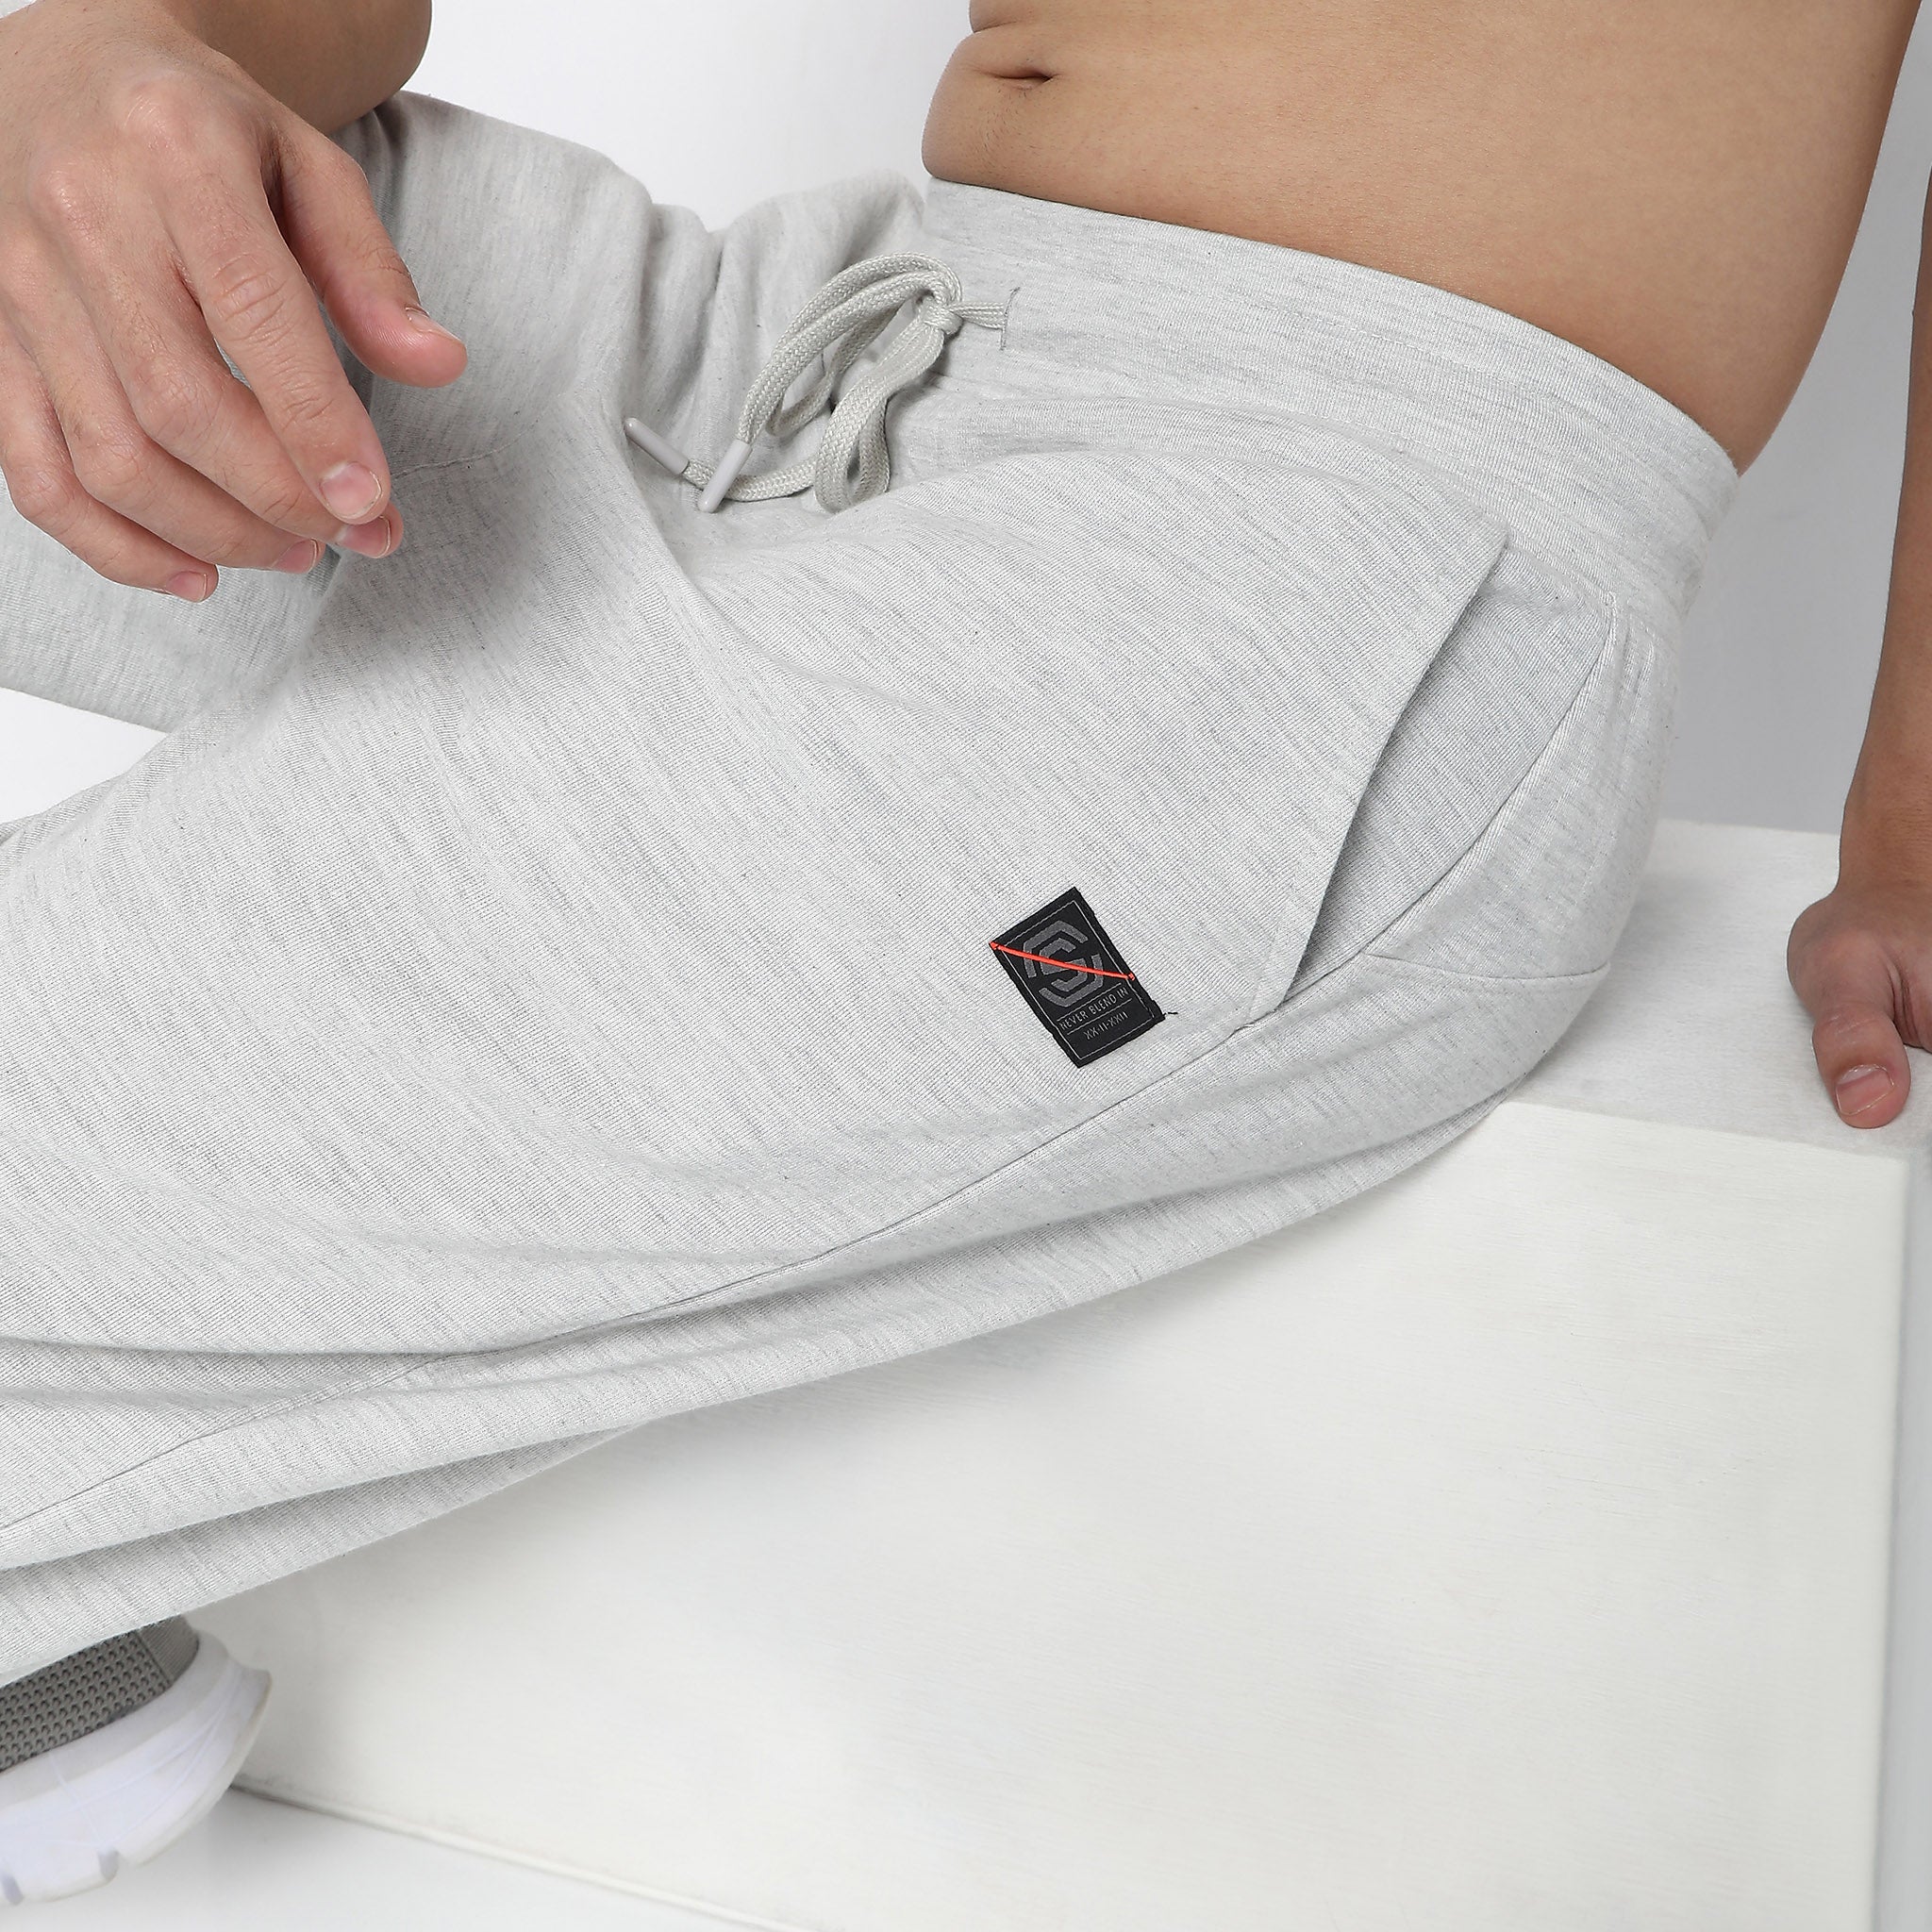 Oversize Solid Mid Rise Trackpants